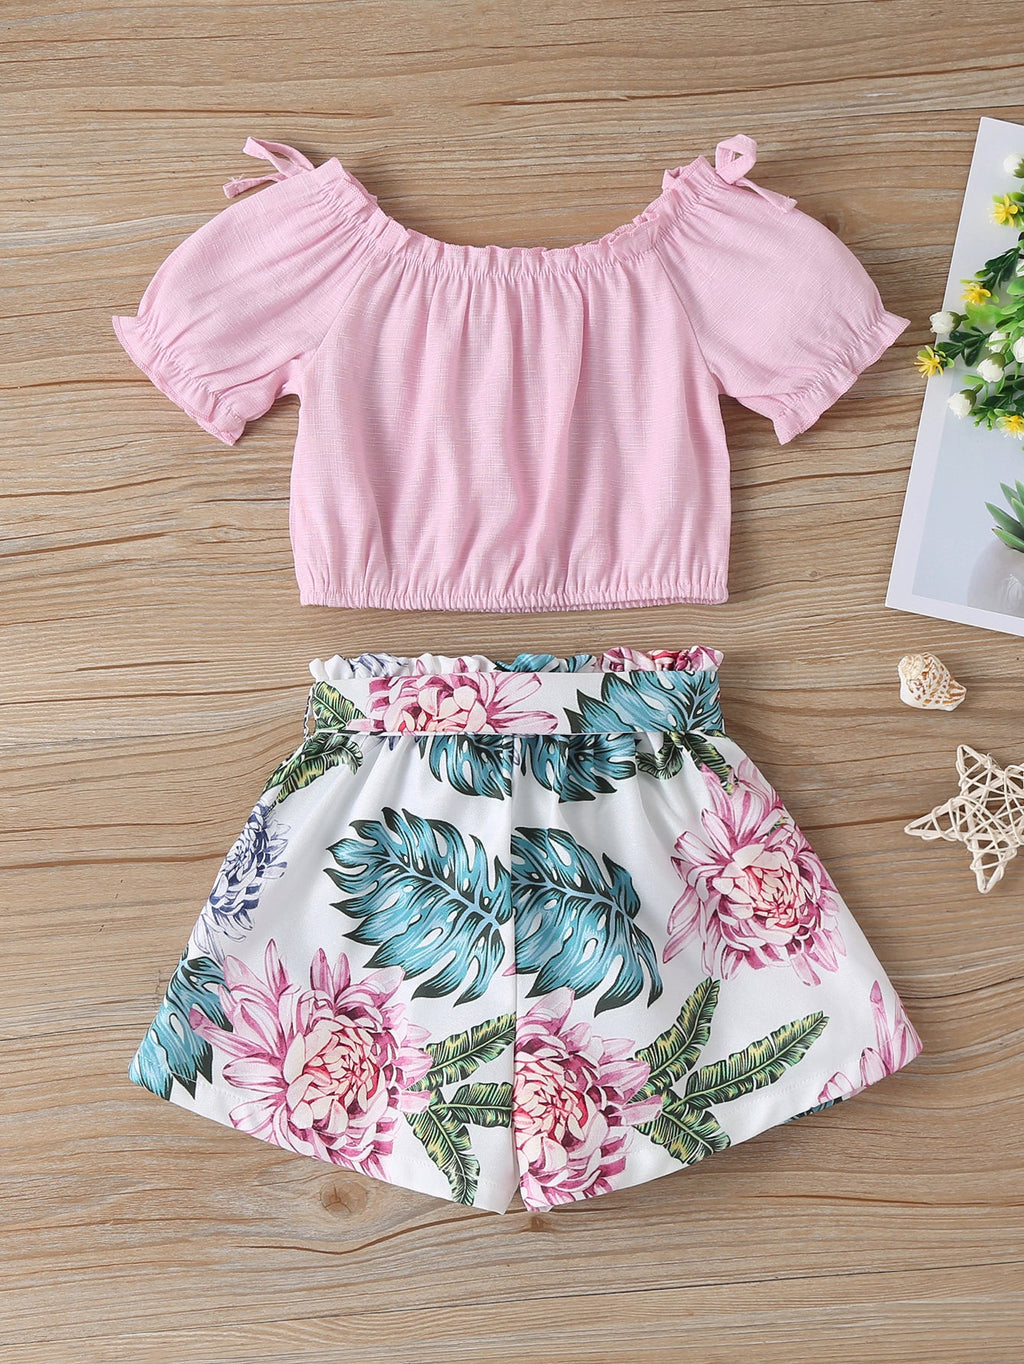 18M-6Y Toddler Girls Outfits Sets Off-Shoulder Top & Flower Print Shorts Wholesale Sunny Girl Clothing - PrettyKid